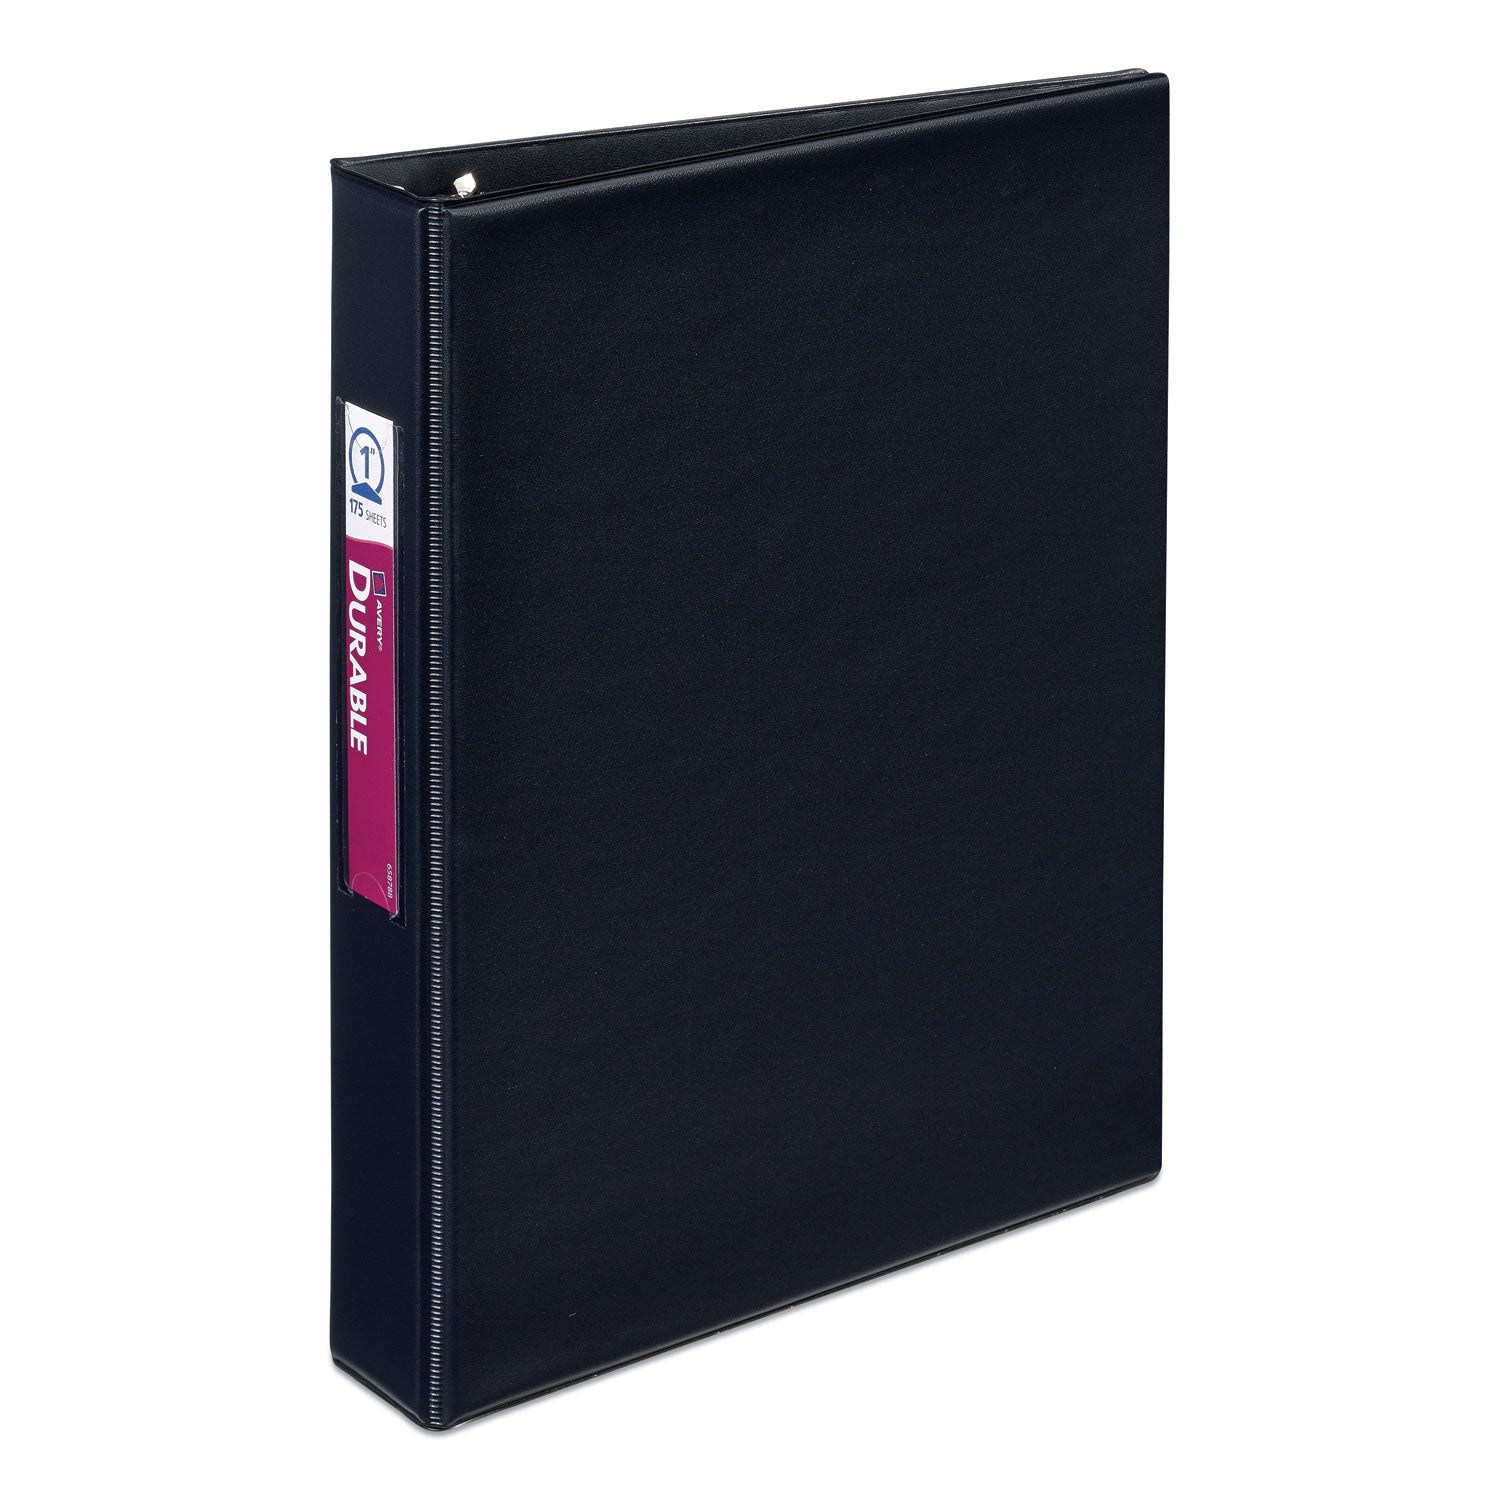 Mini Size Durable Non-View Binder with Round Rings, 3 Rings, 1" Capacity, 8.5 x 5.5, Black - 